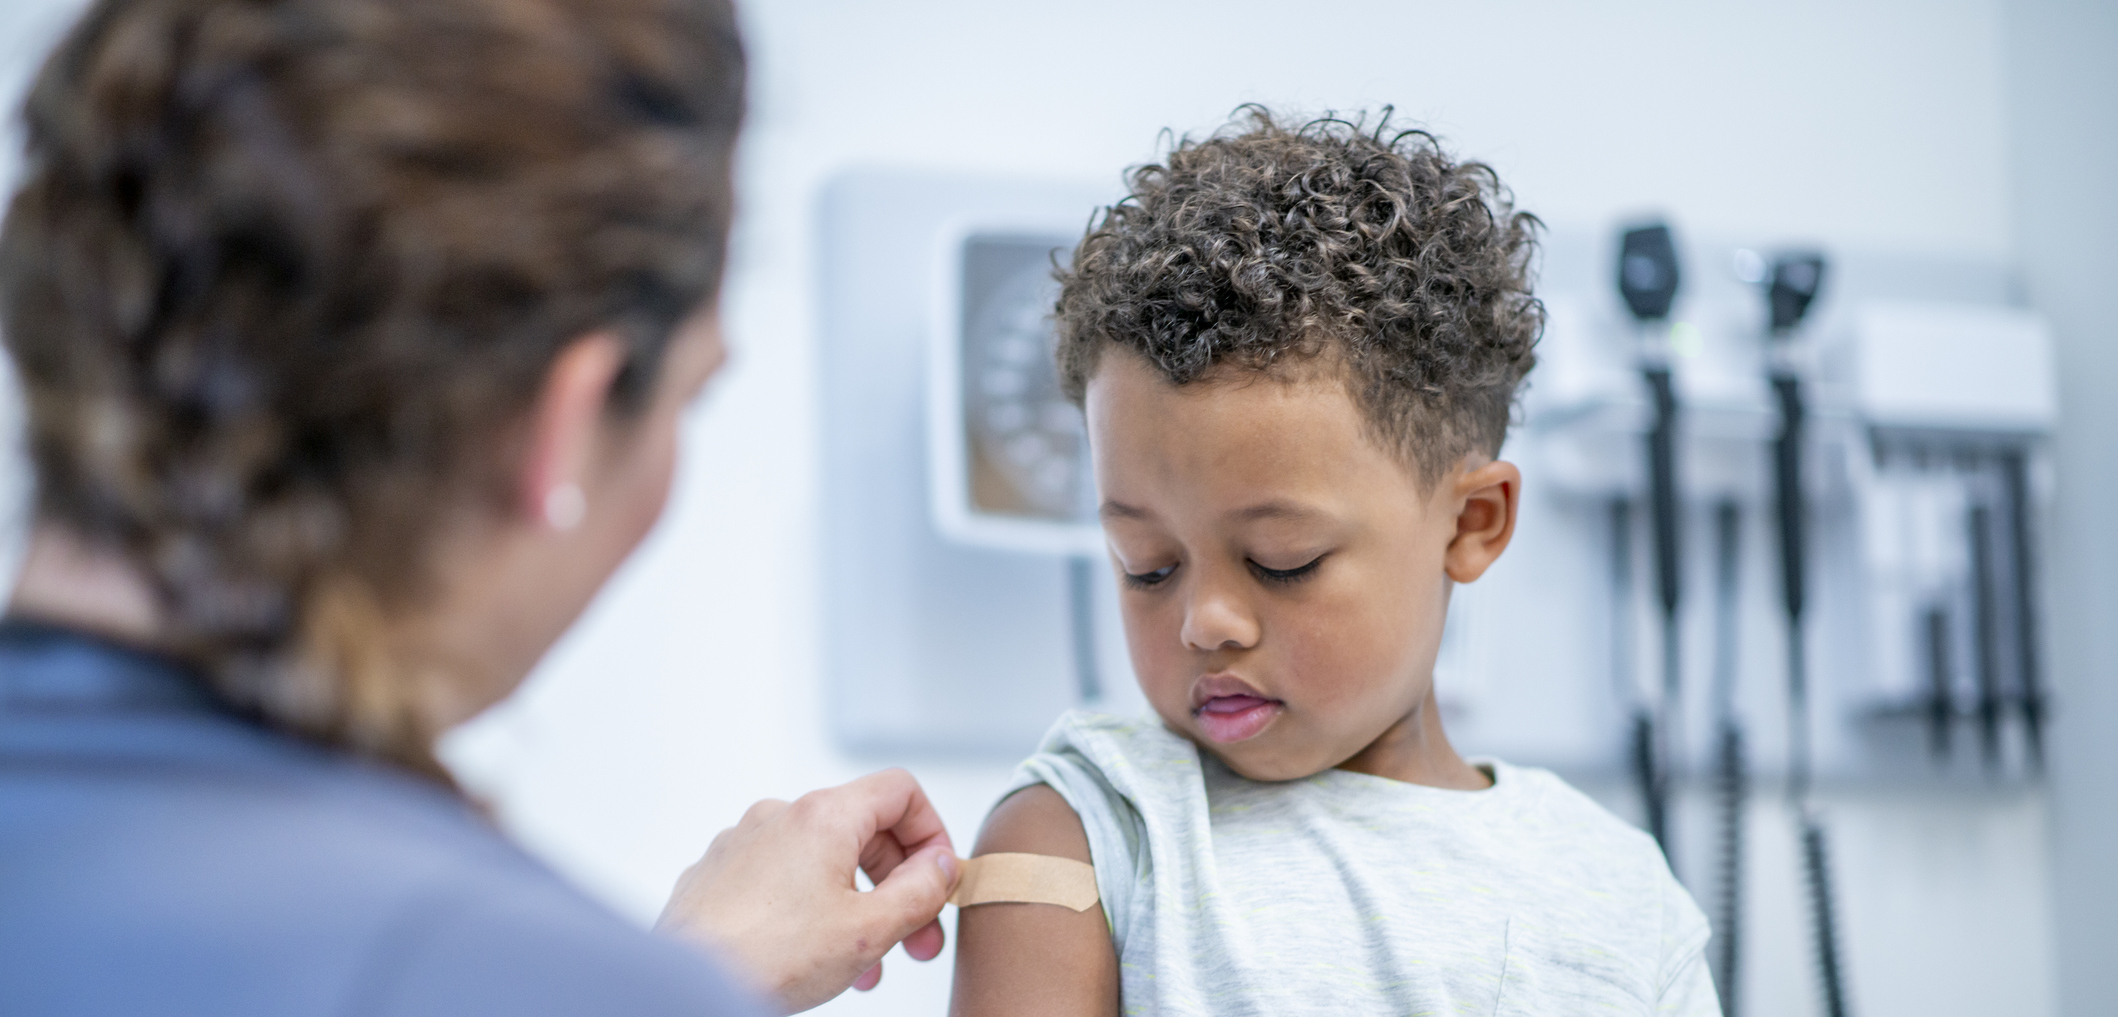 COVID-19 and Flu Vaccines: What You Need to Know